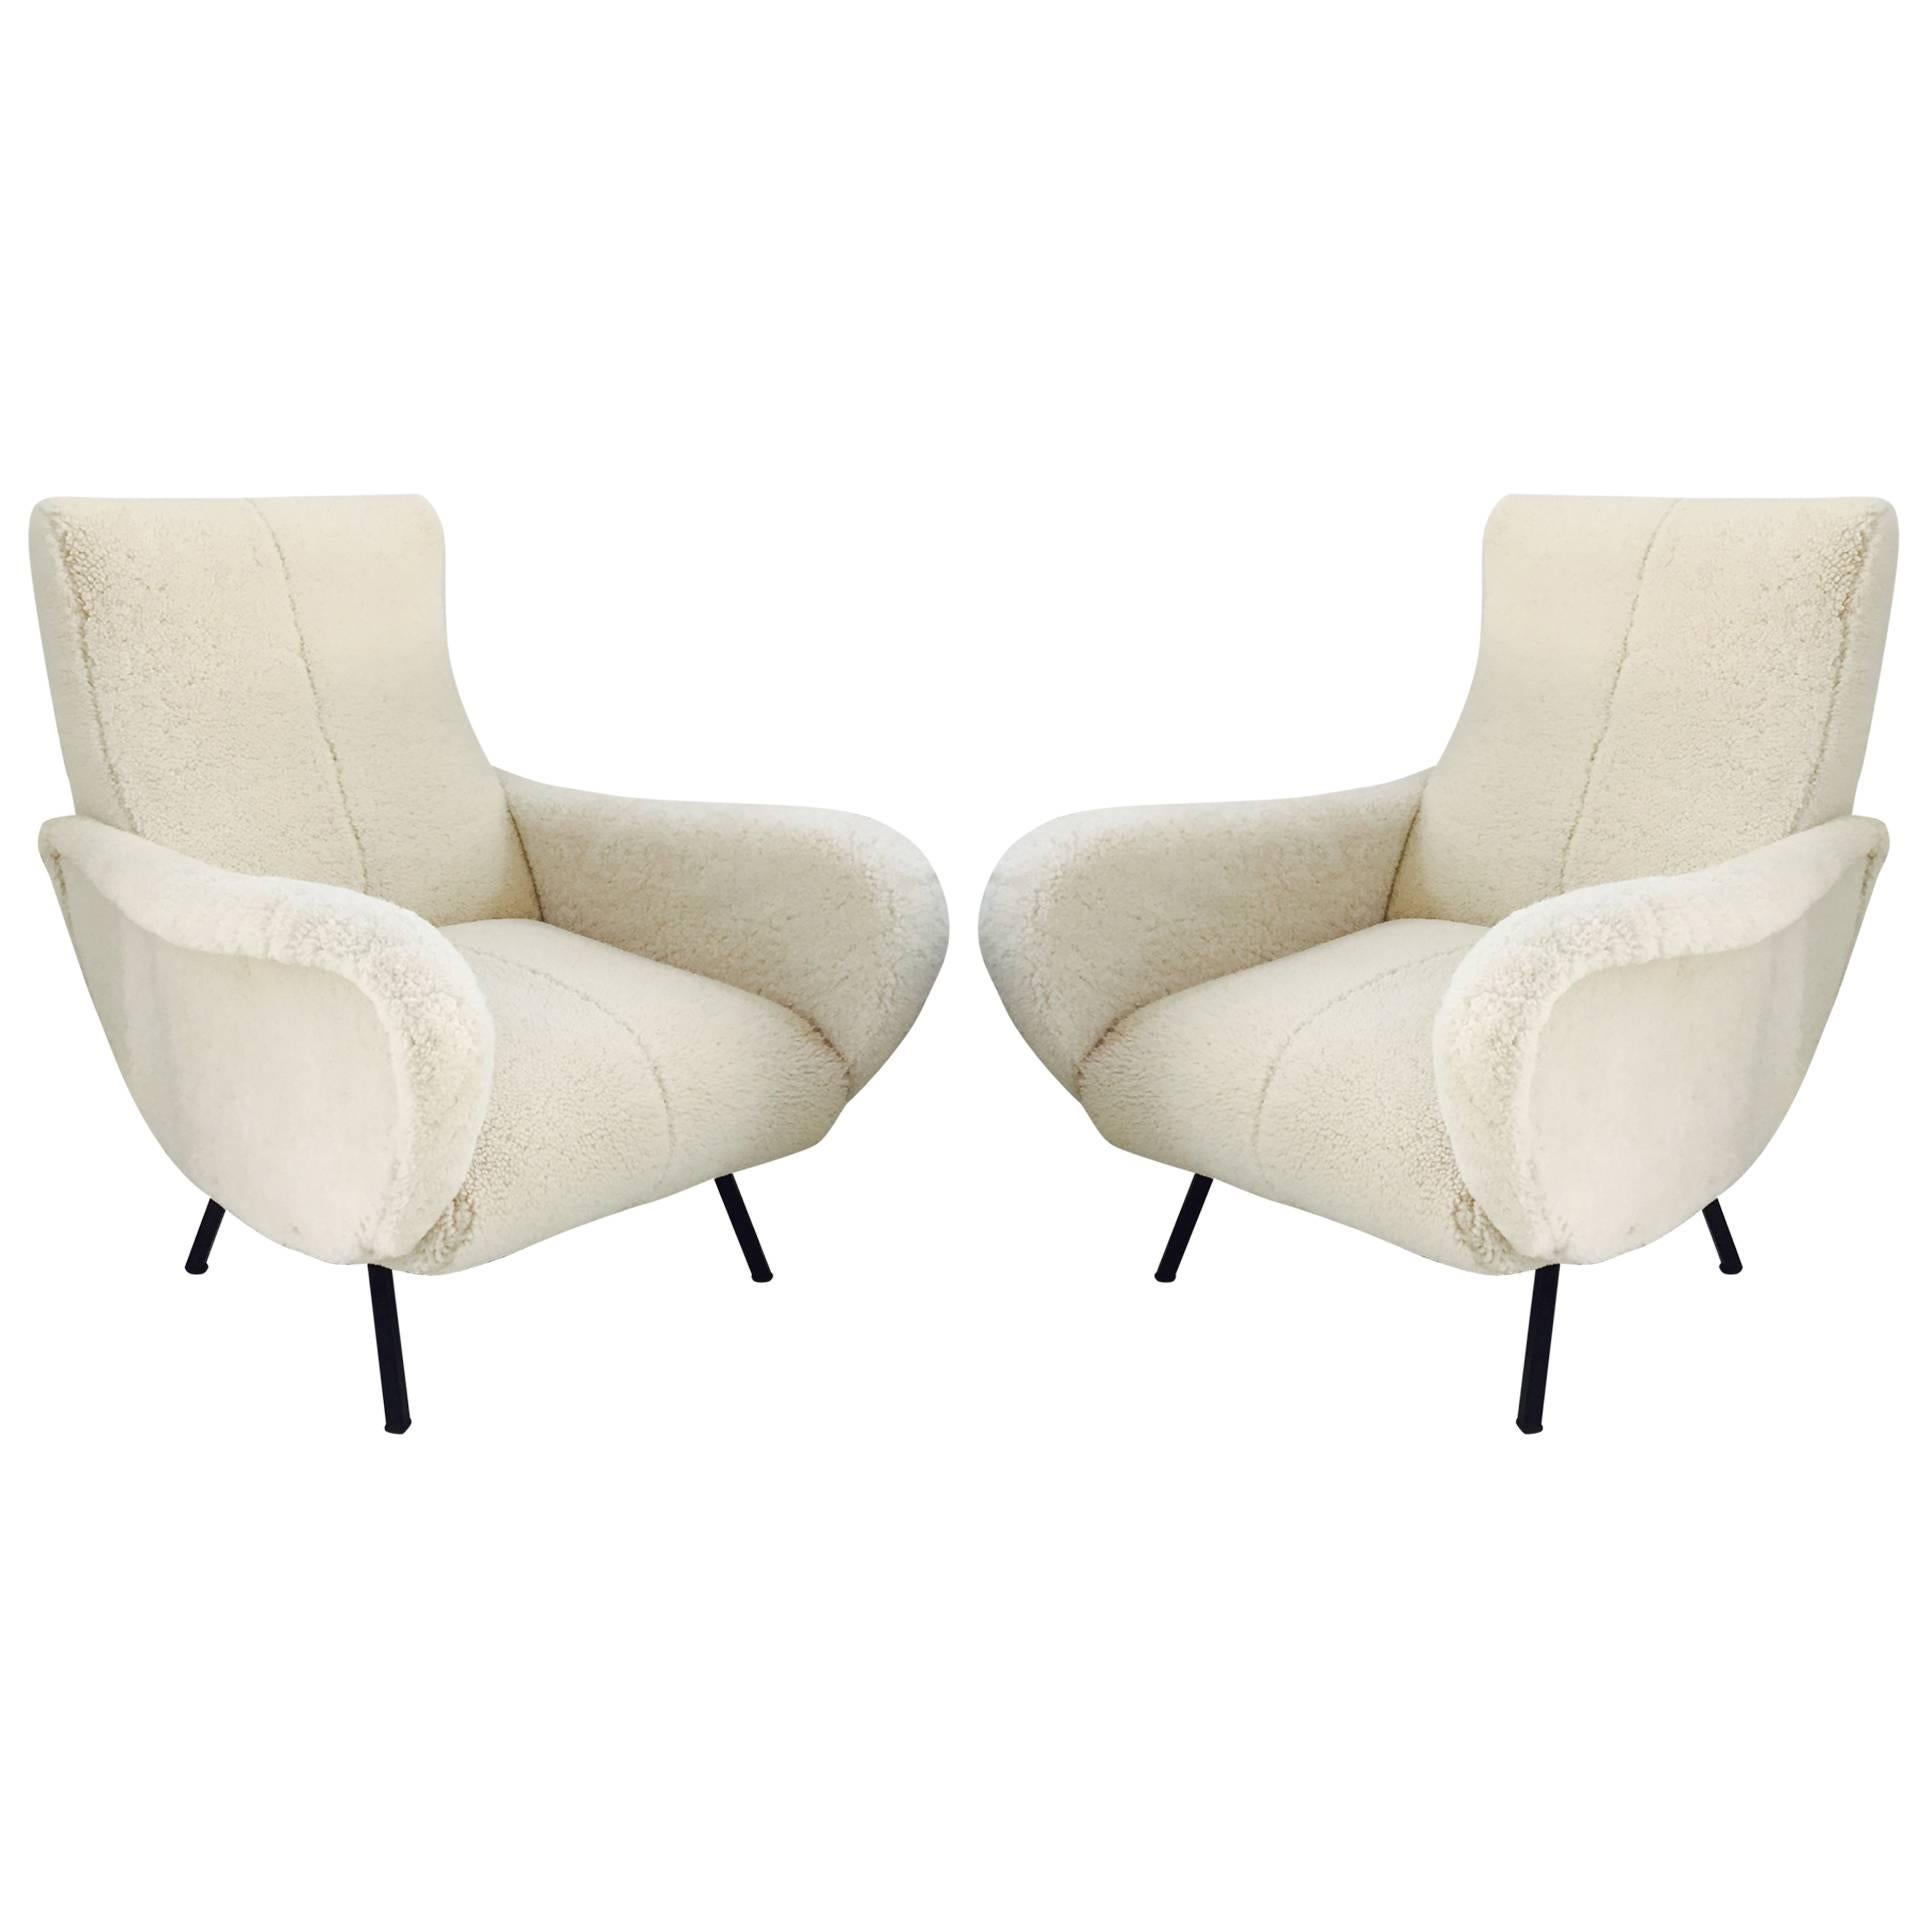 Pair of Mid Century Italian Chairs, Shearling and Black Metal, circa 1950s